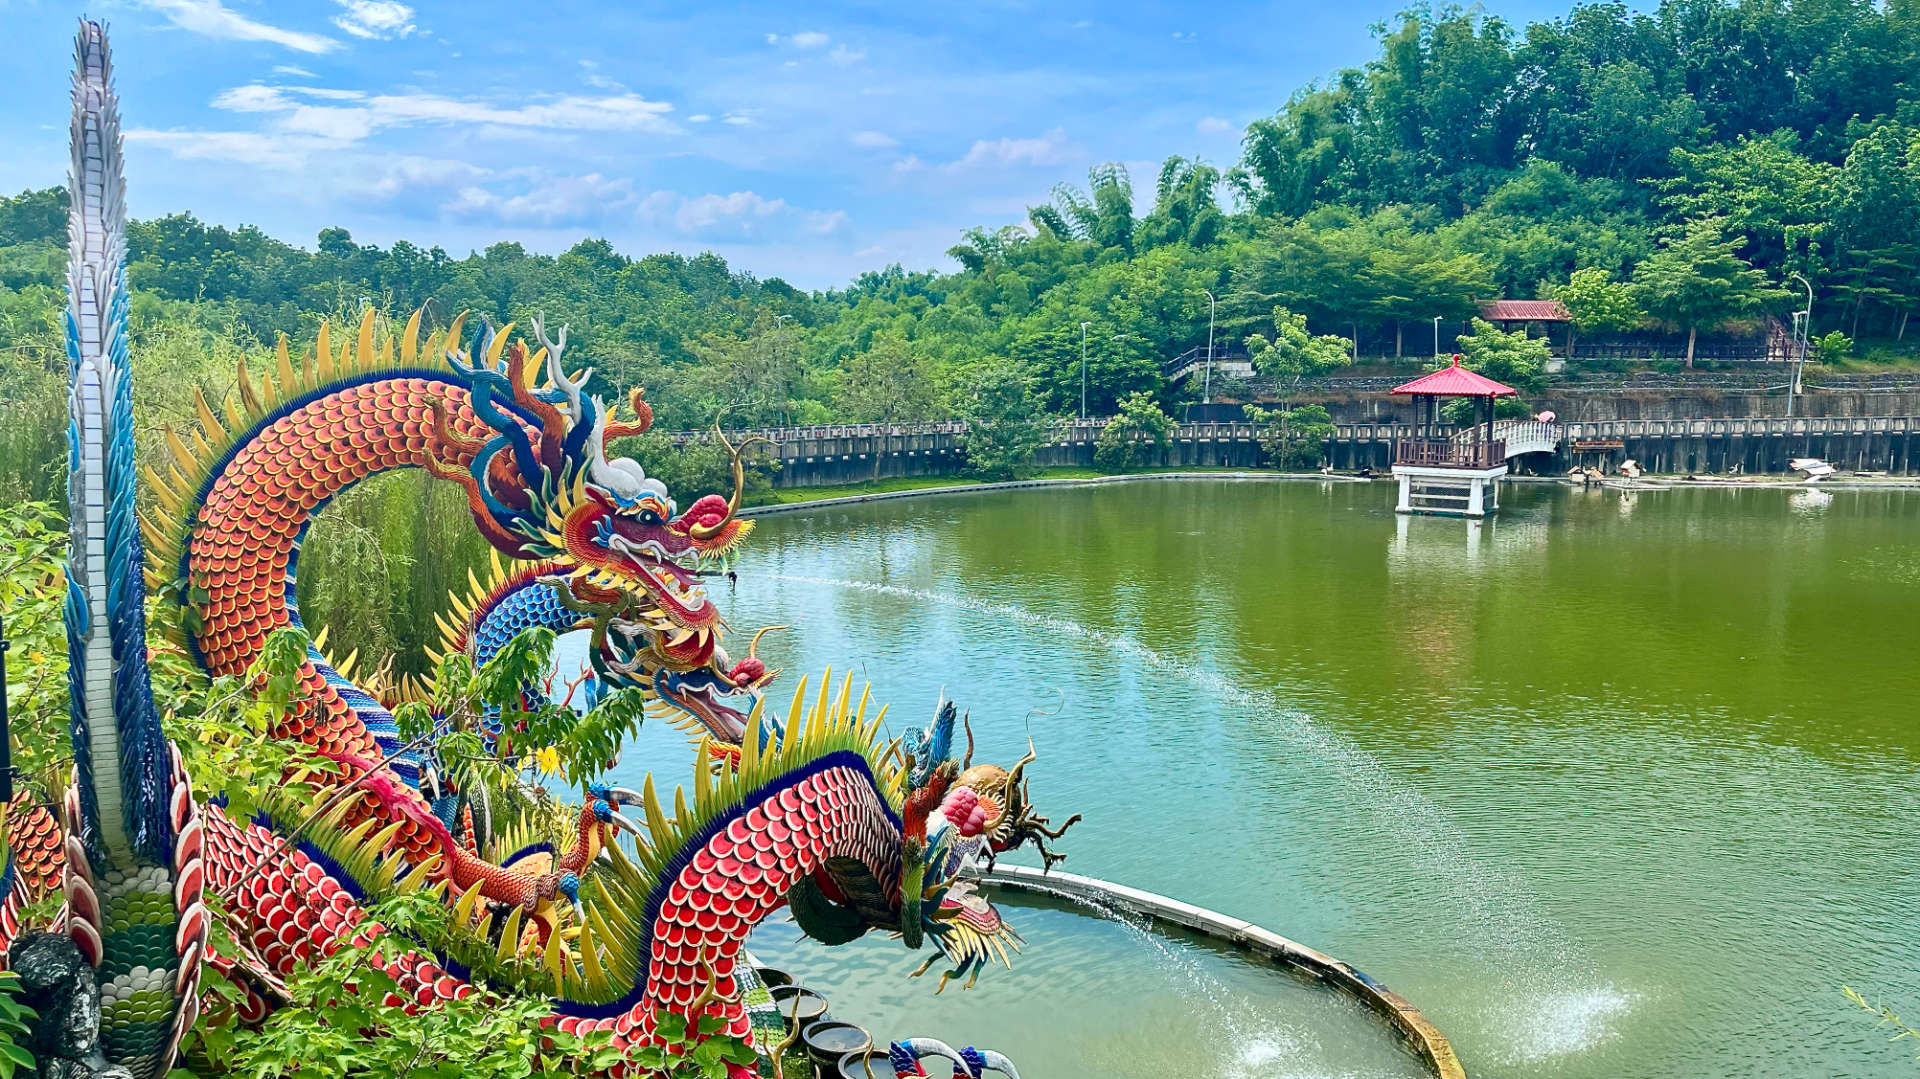 Statues of four colorful dragons beside a lake, with water spraying out of their mouths.